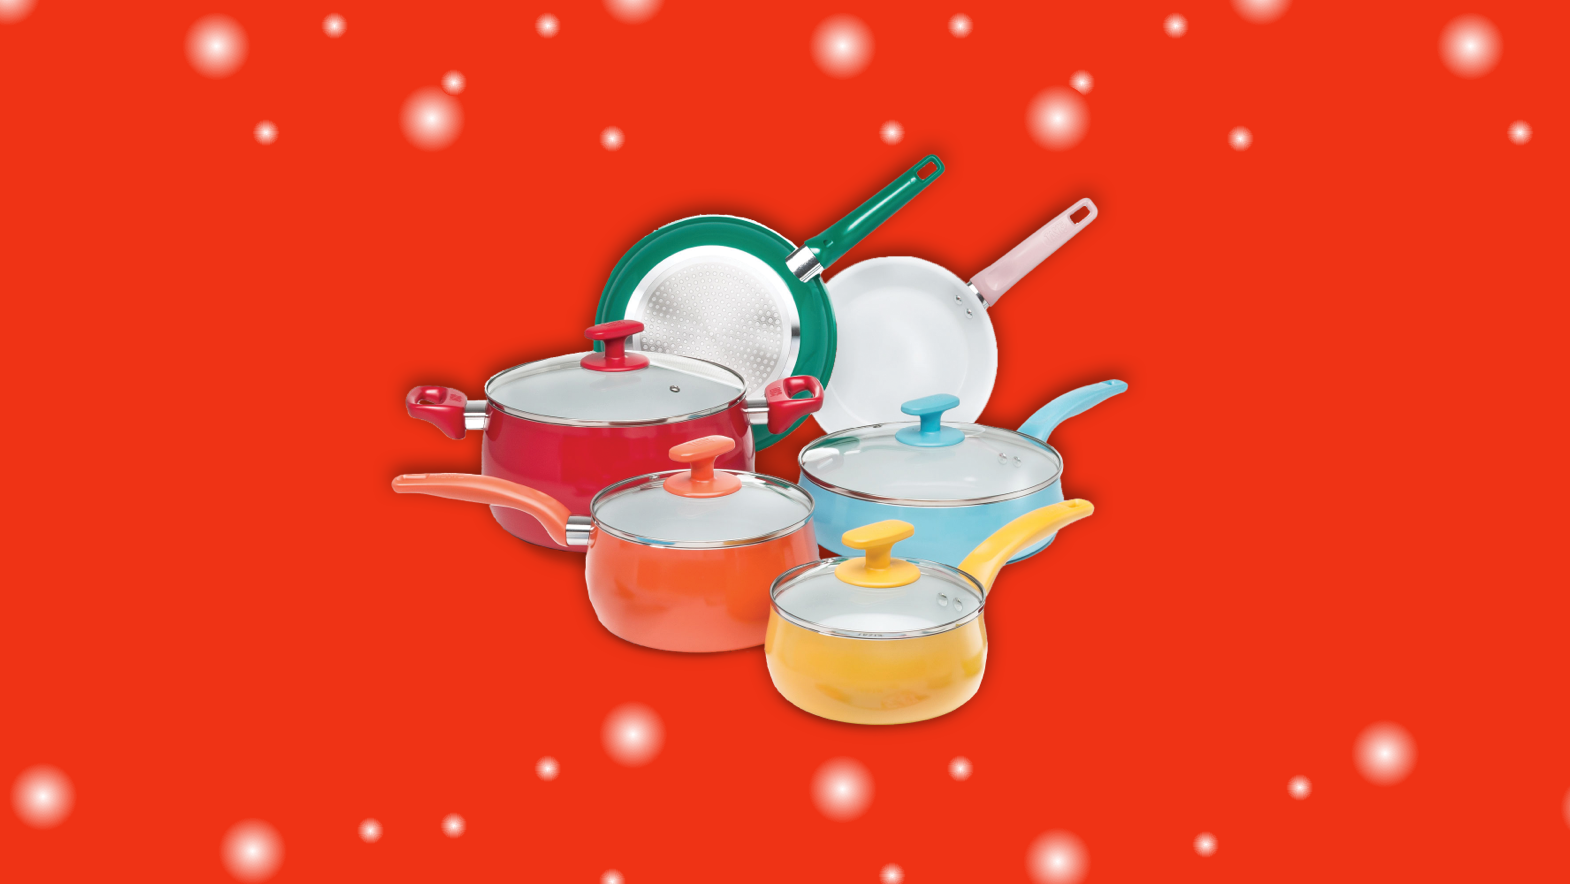 Cookware in many colors on a red background.